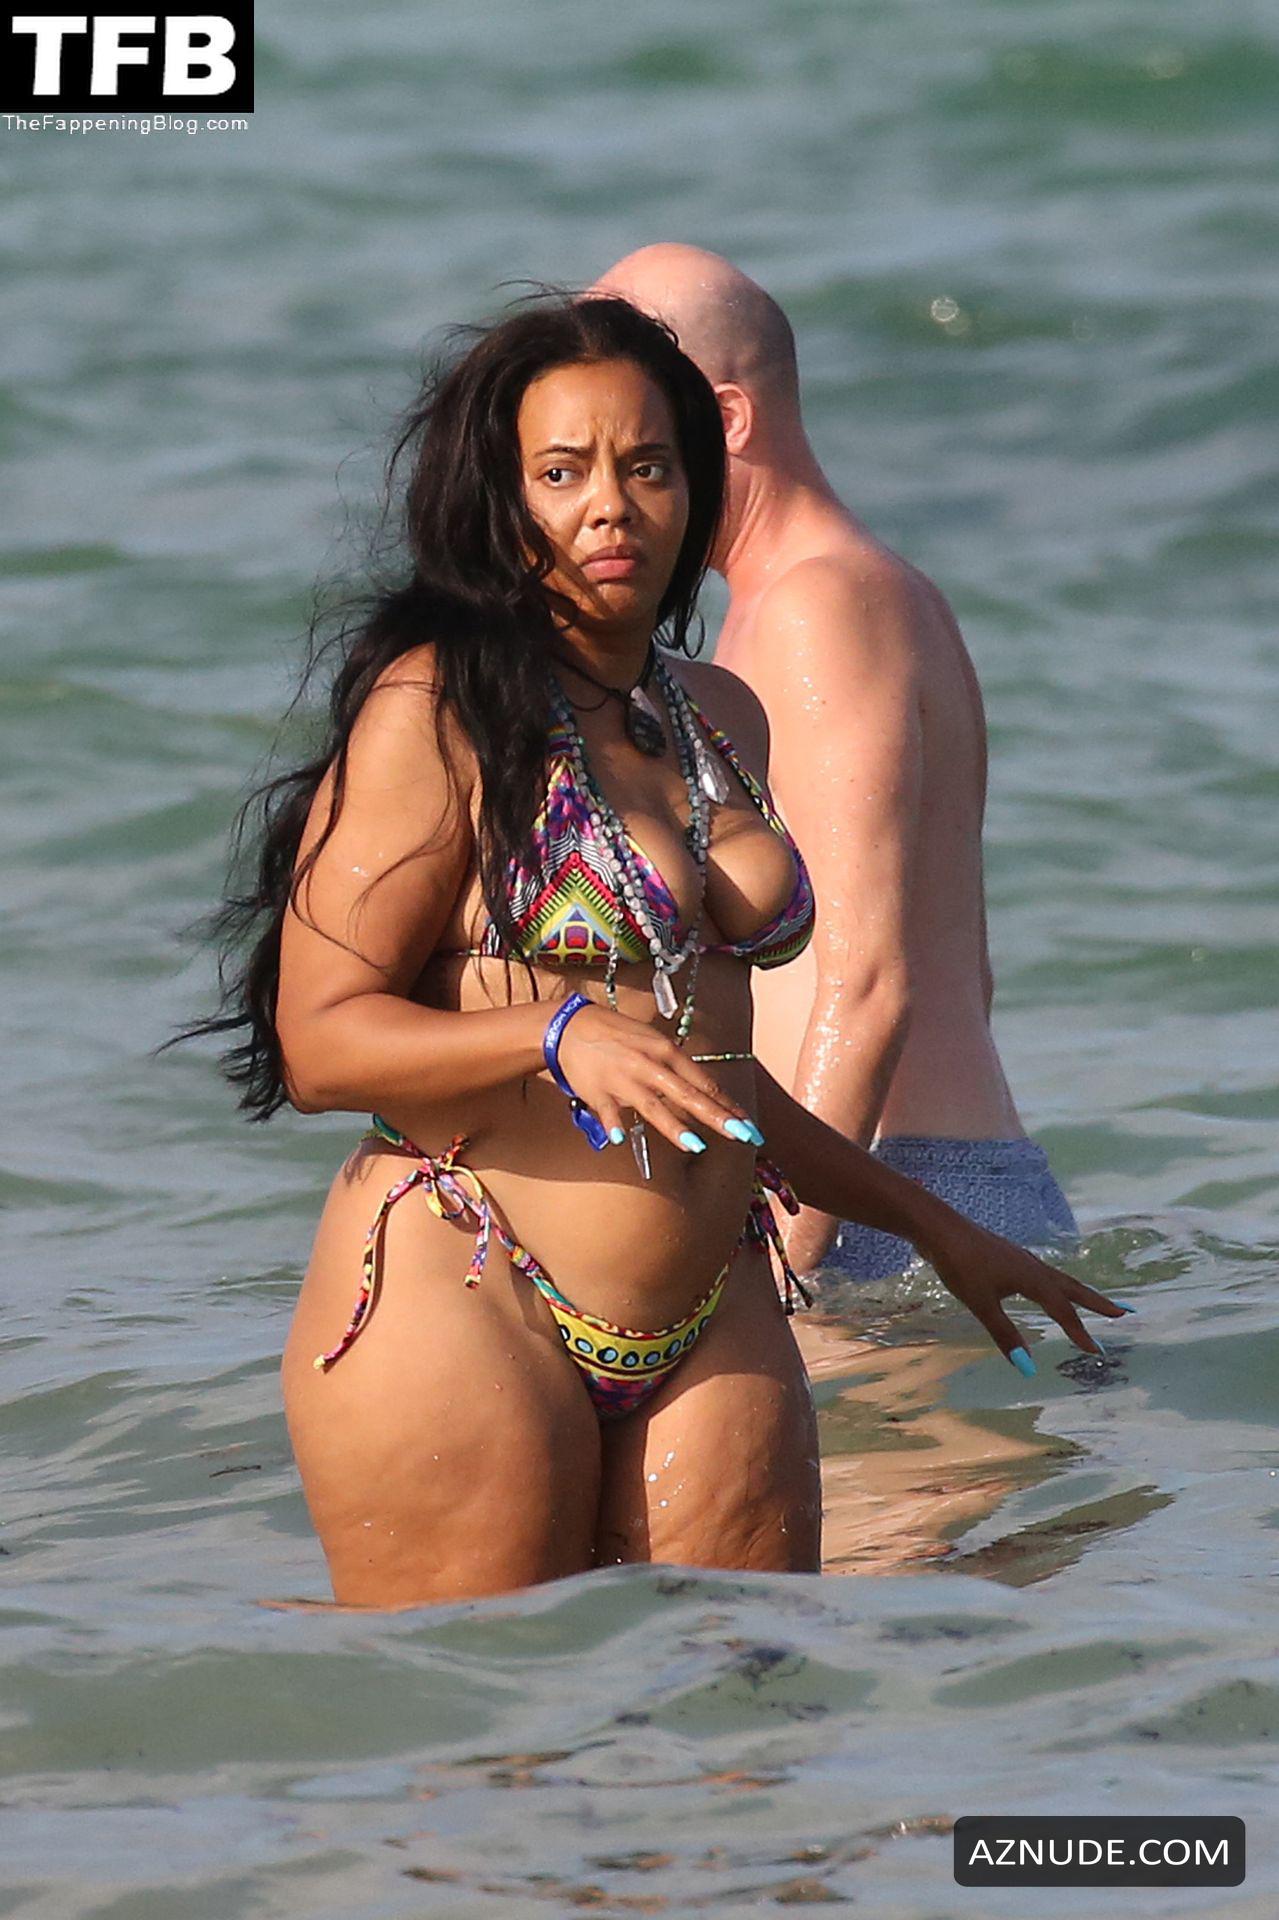 Angela Simmons Sexy Seen Showing Off Her Curves On The Beach In Miami Aznude 